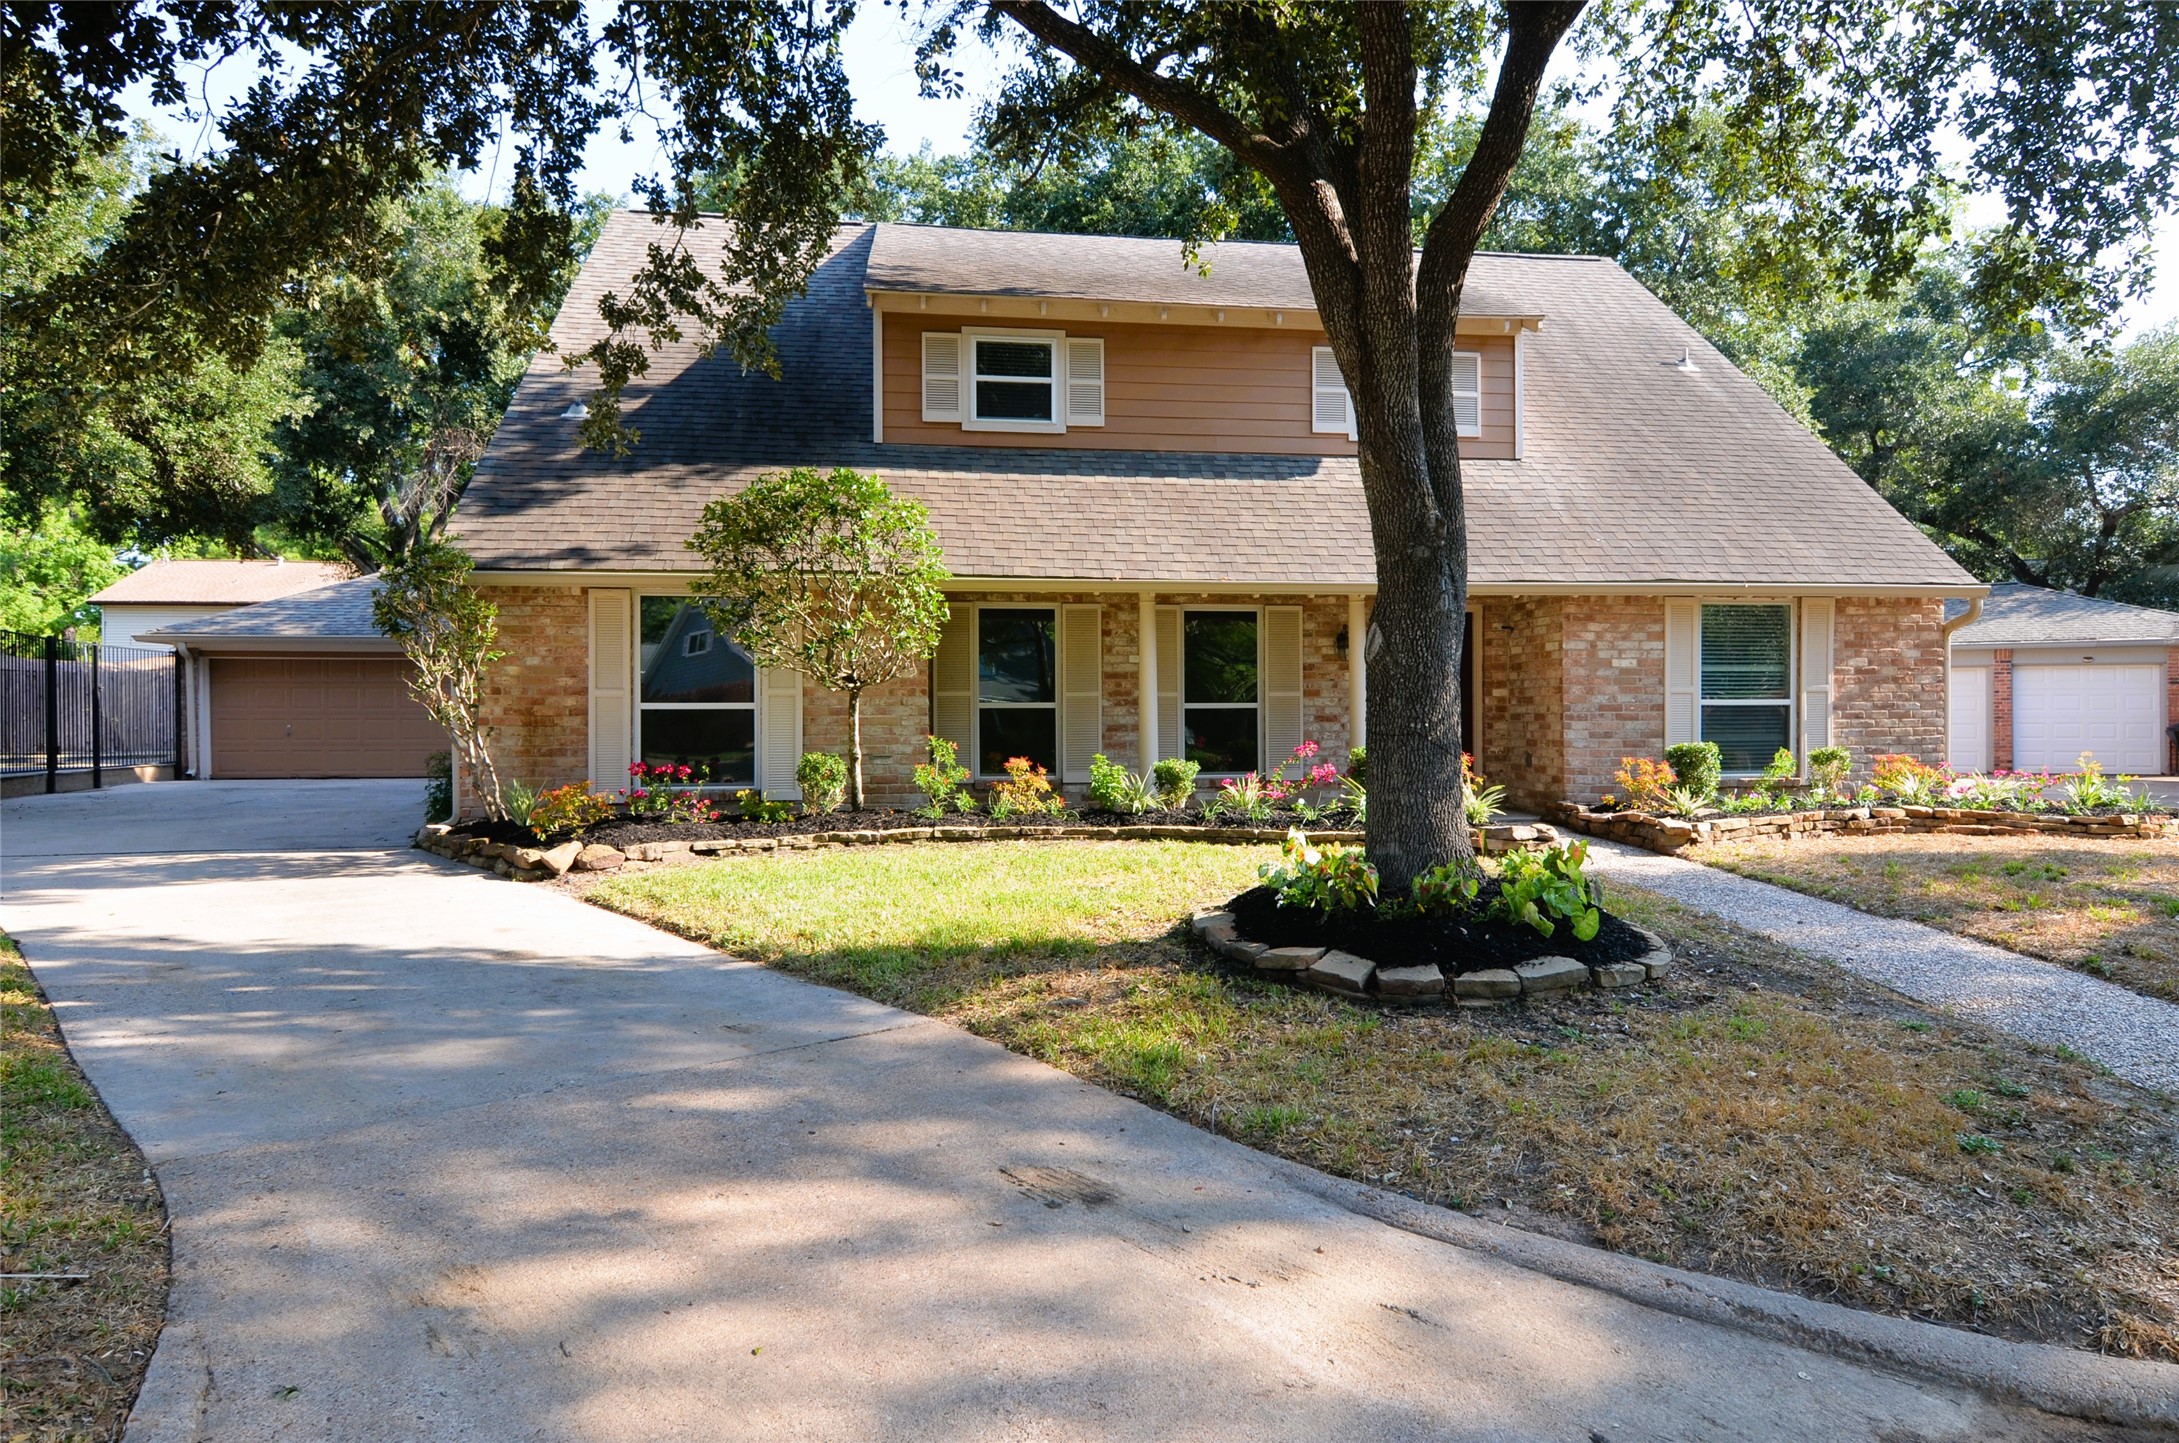 4110 Cypresswood has Great Curb appeal and so much to offer!!!